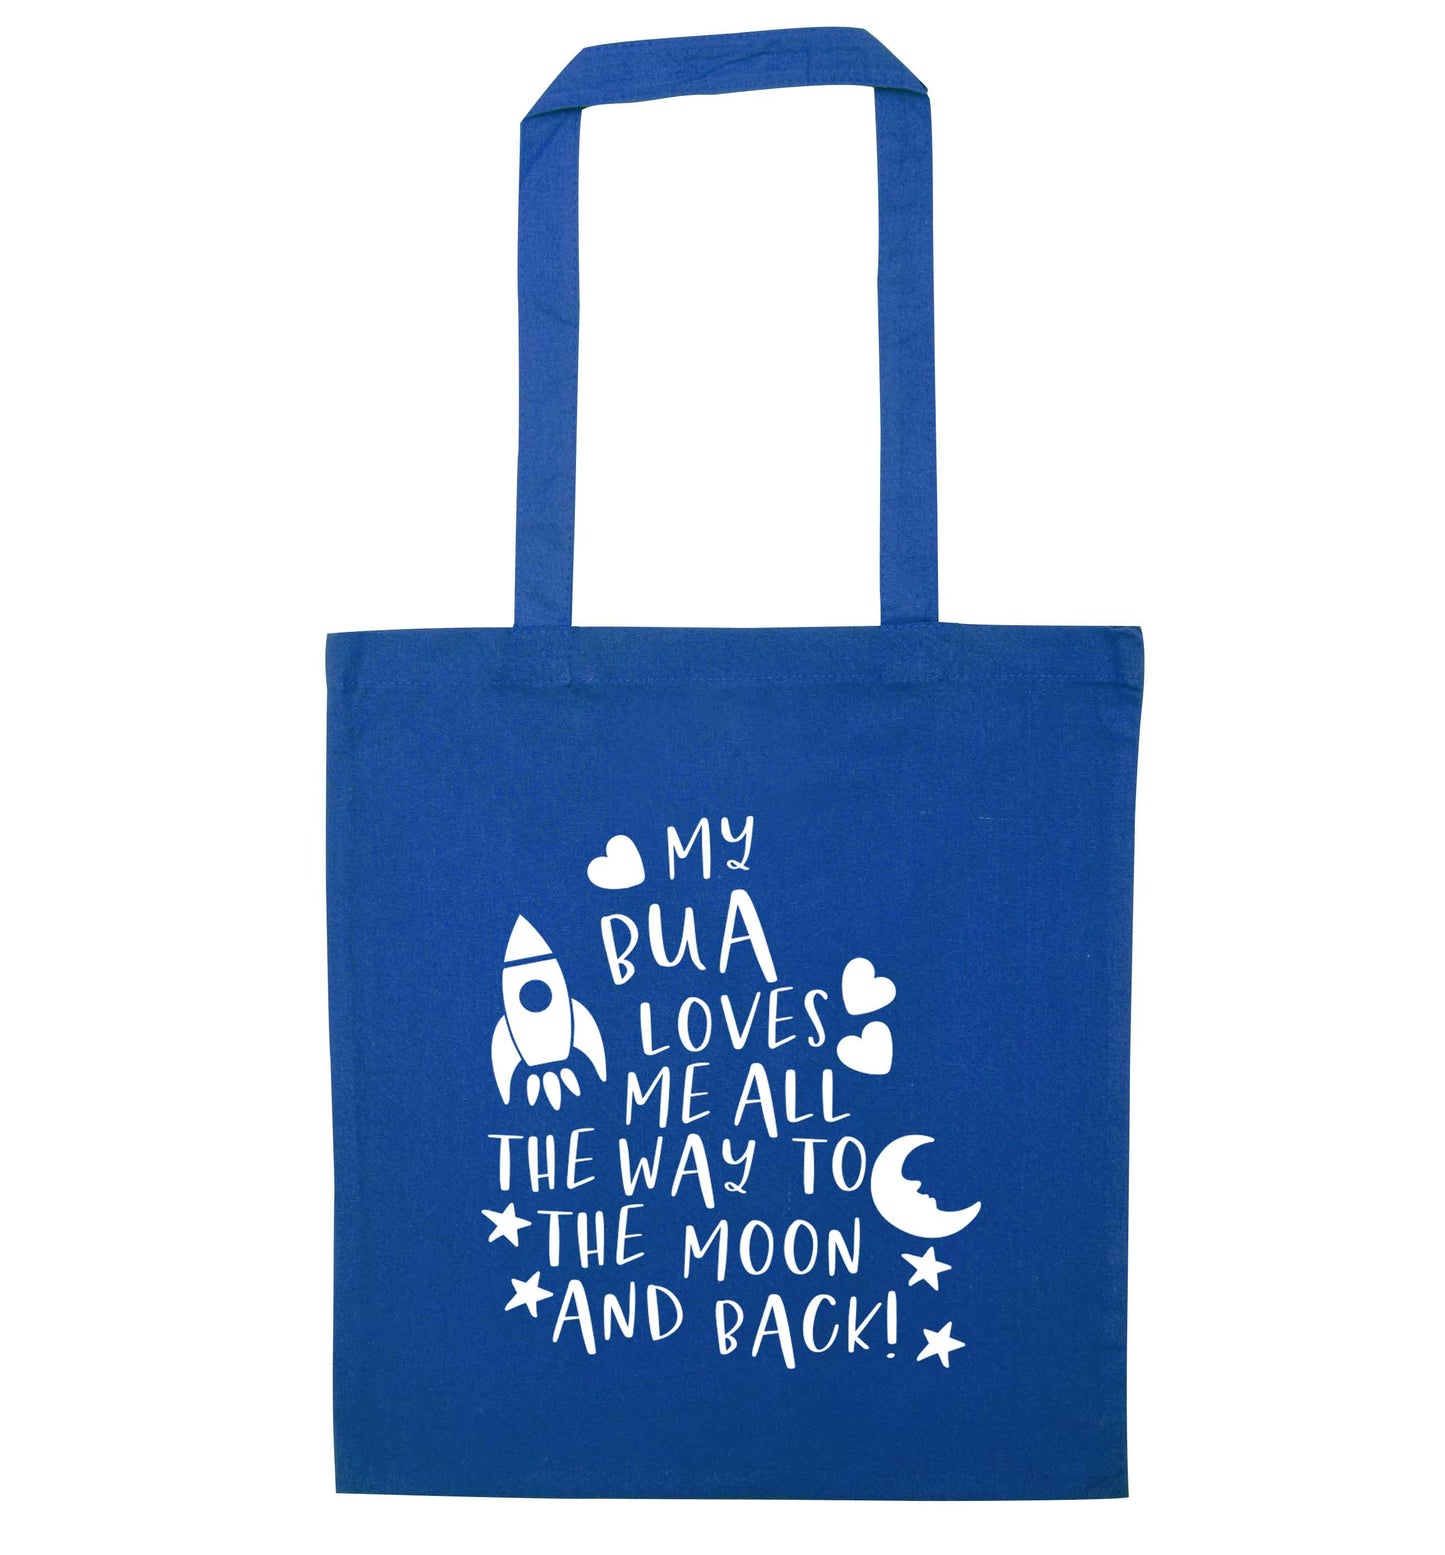 My bua loves me all they way to the moon and back blue tote bag